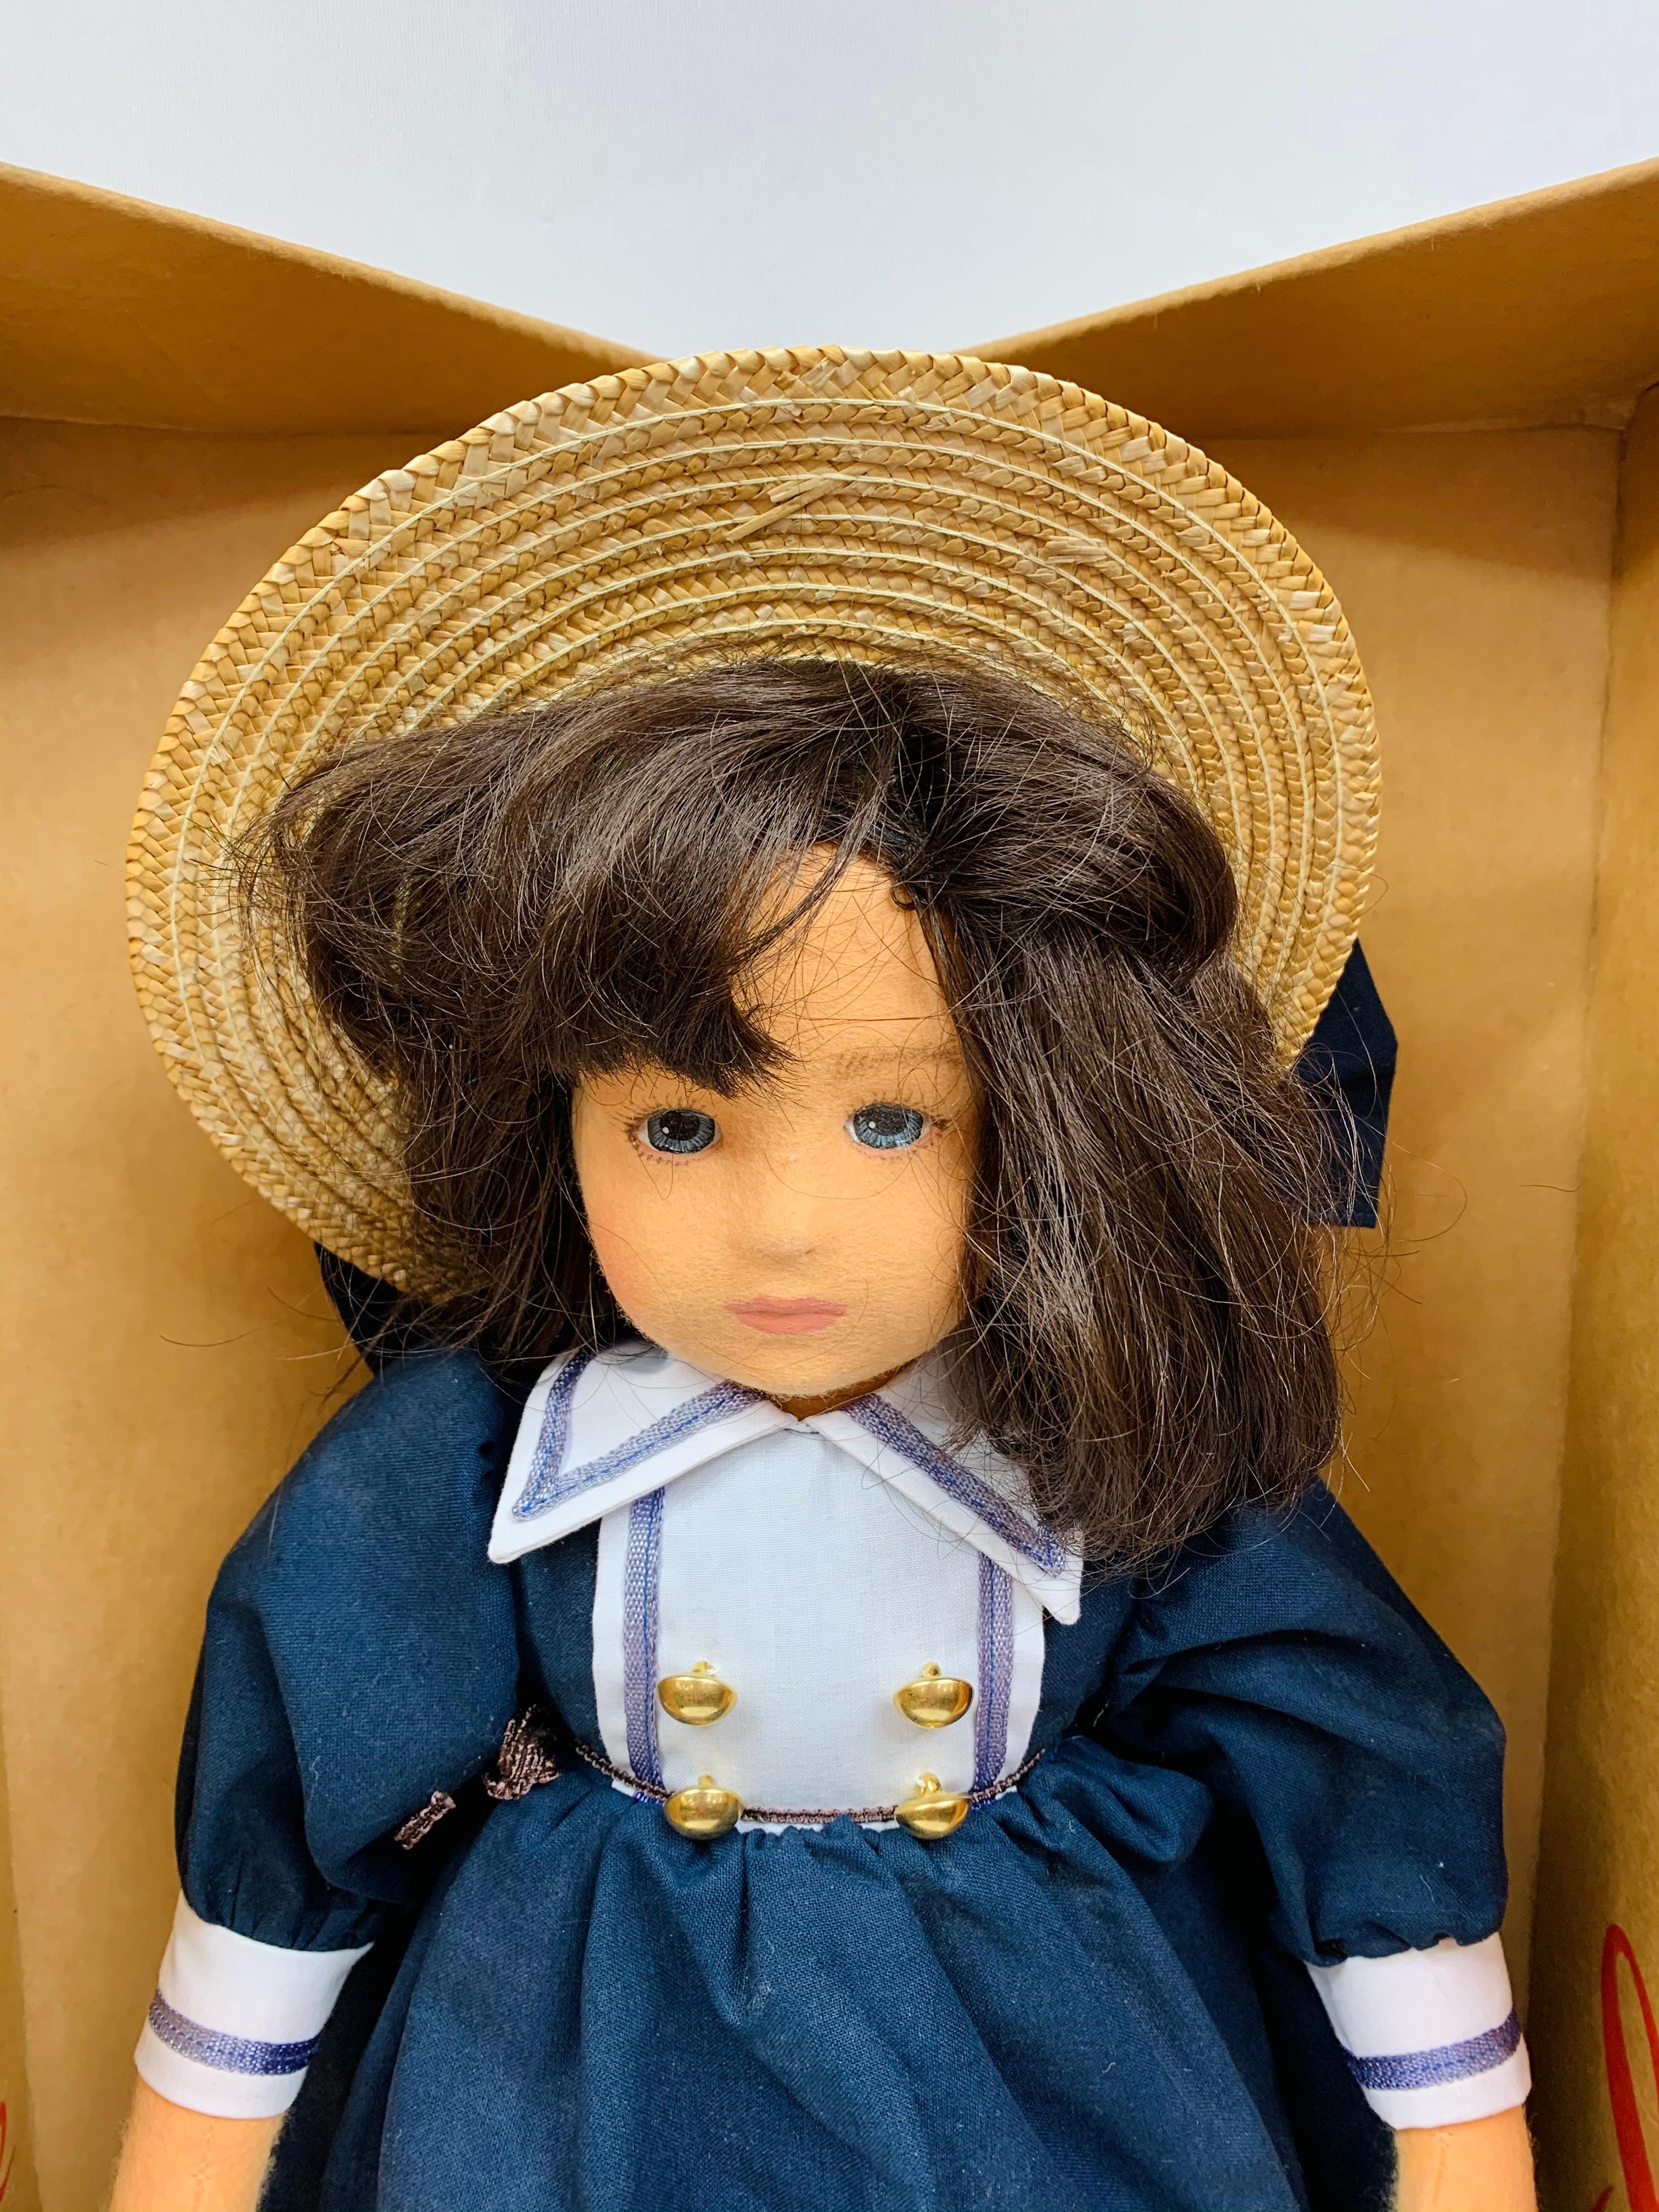 The Lenci doll is one of the most beautiful dolls ever made. This rare beautiful vintage original Lenci Doll from 1980s. The doll was purchased from the Nurnberg toy fair in 1996 and still have the original tags along with a certificate of origin.